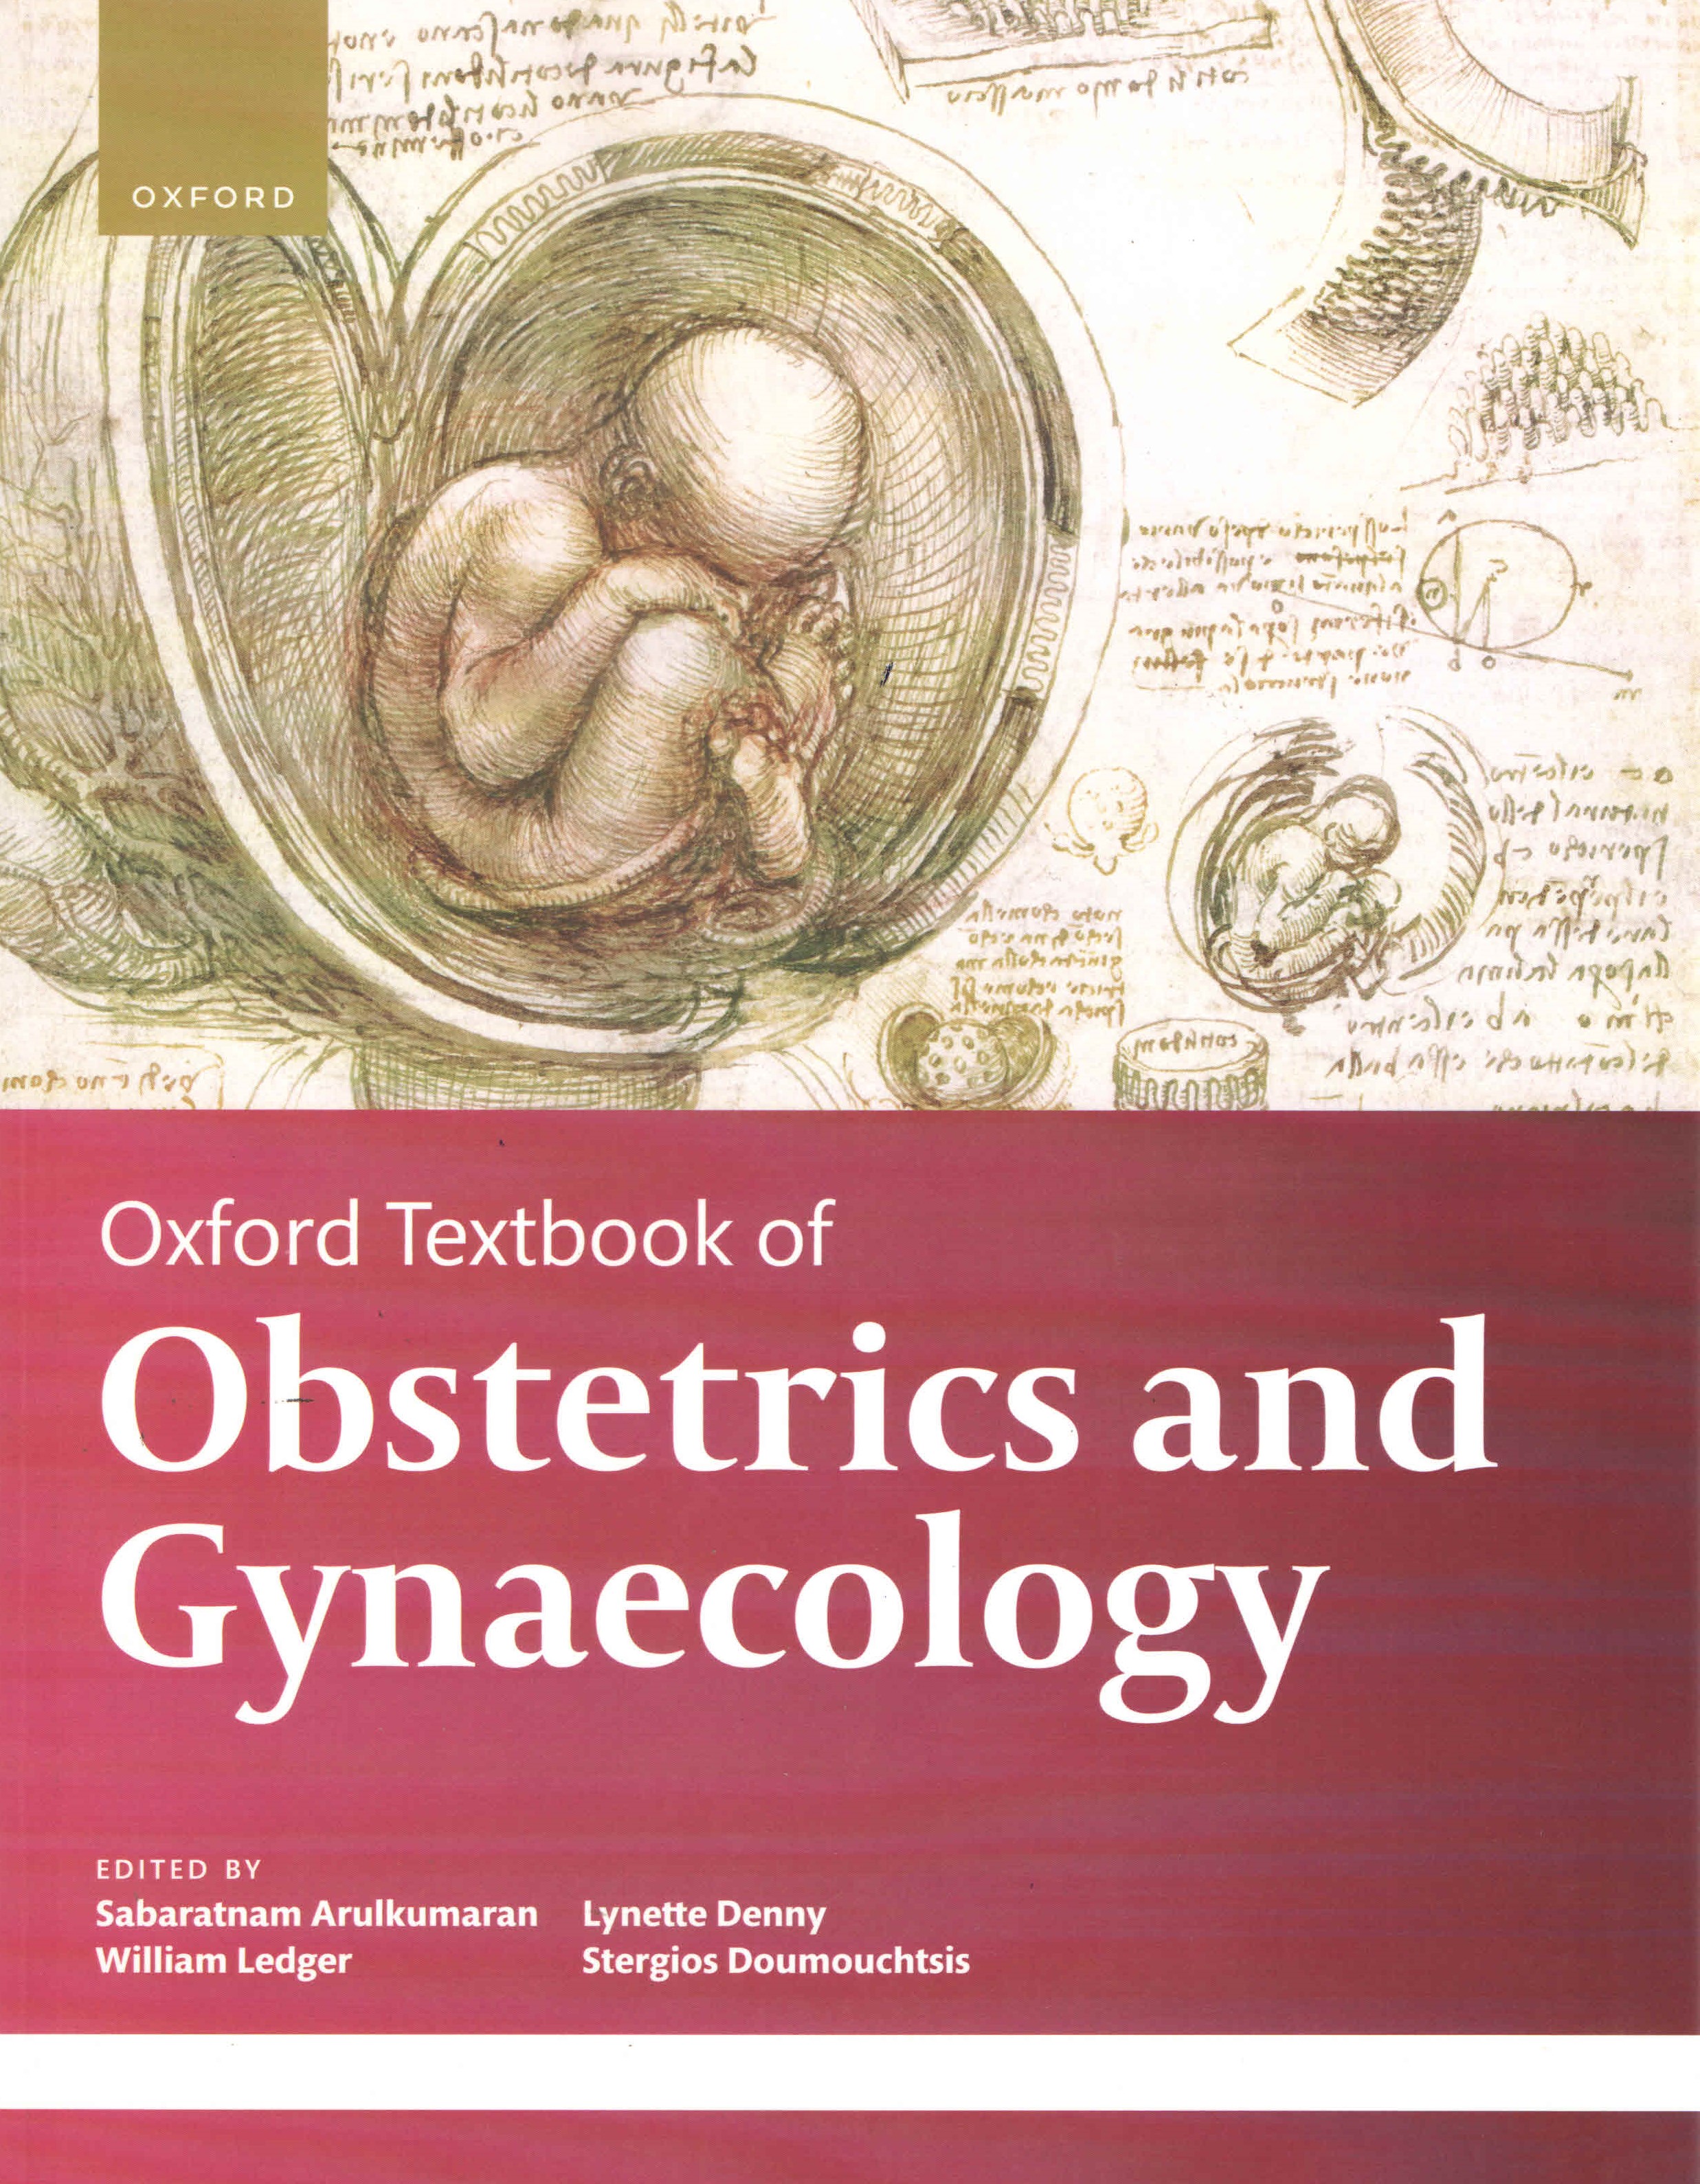 exclusive-publishers/oxford-university-press/oxford-textbook-of-obstetrics-and-gynaecology-9780198874829